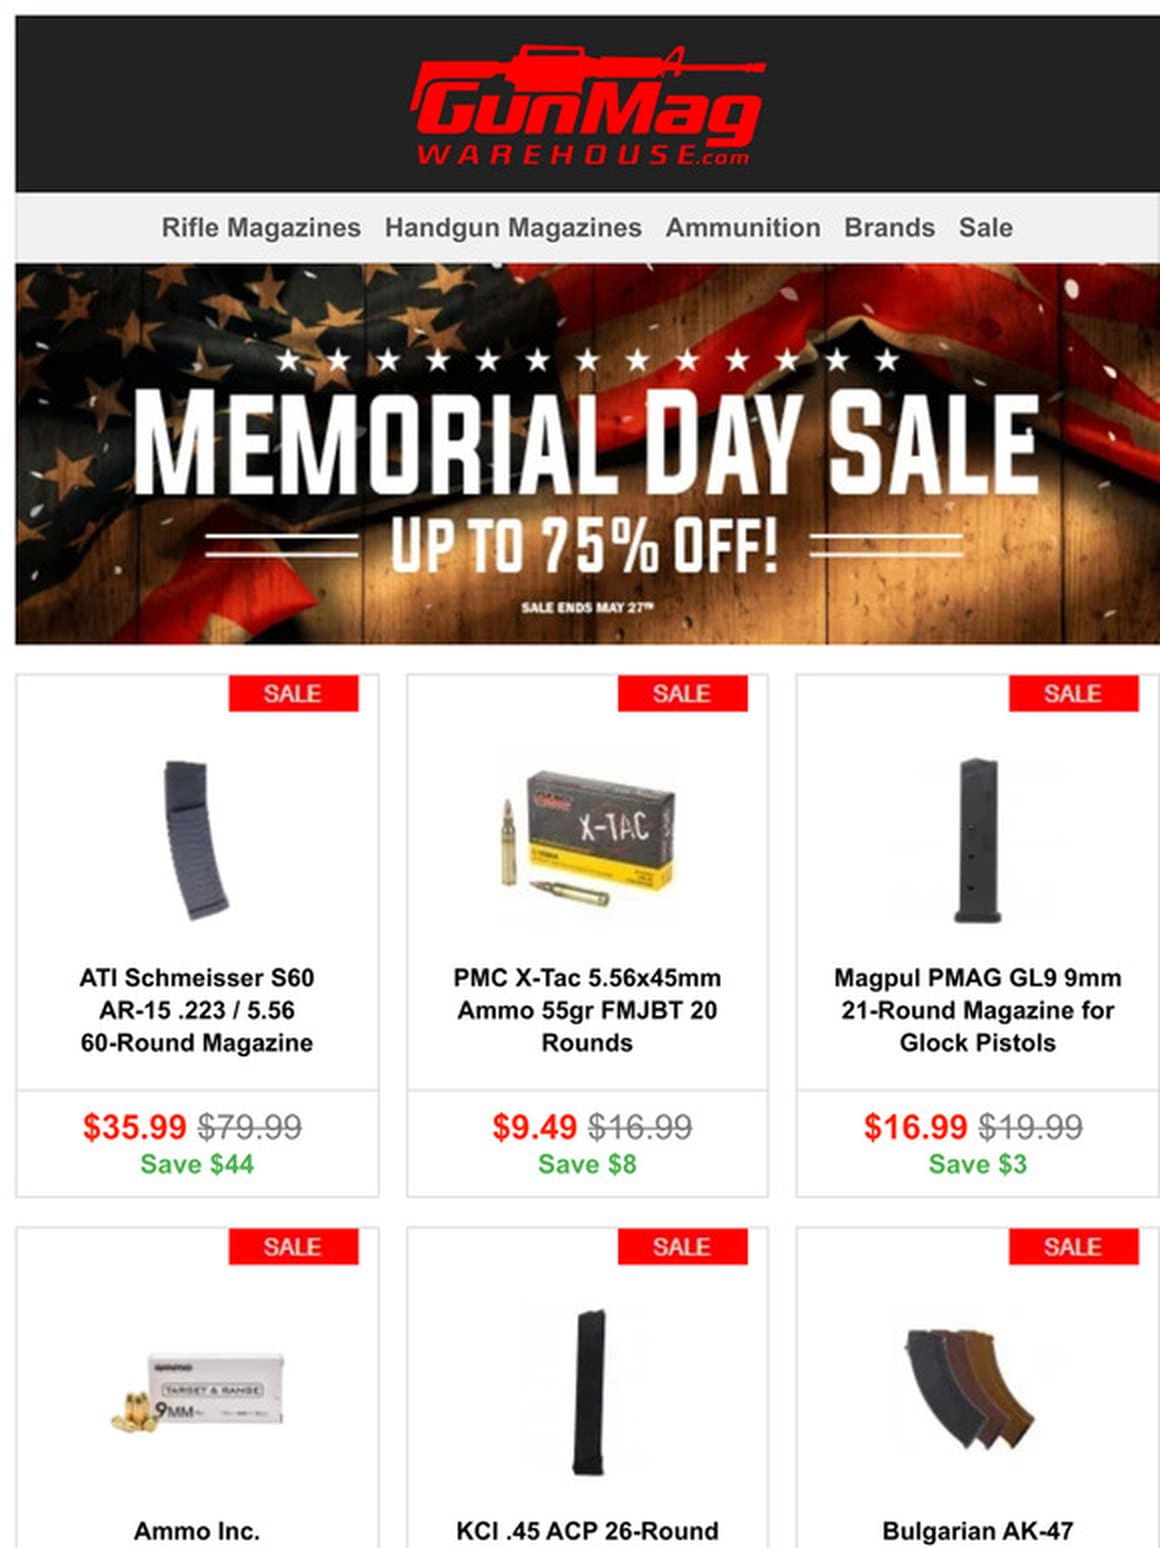 These Memorial Day Deals You Don’t Want To Miss | ATI Schmeisser S60 AR-15 60rd Mag for $36